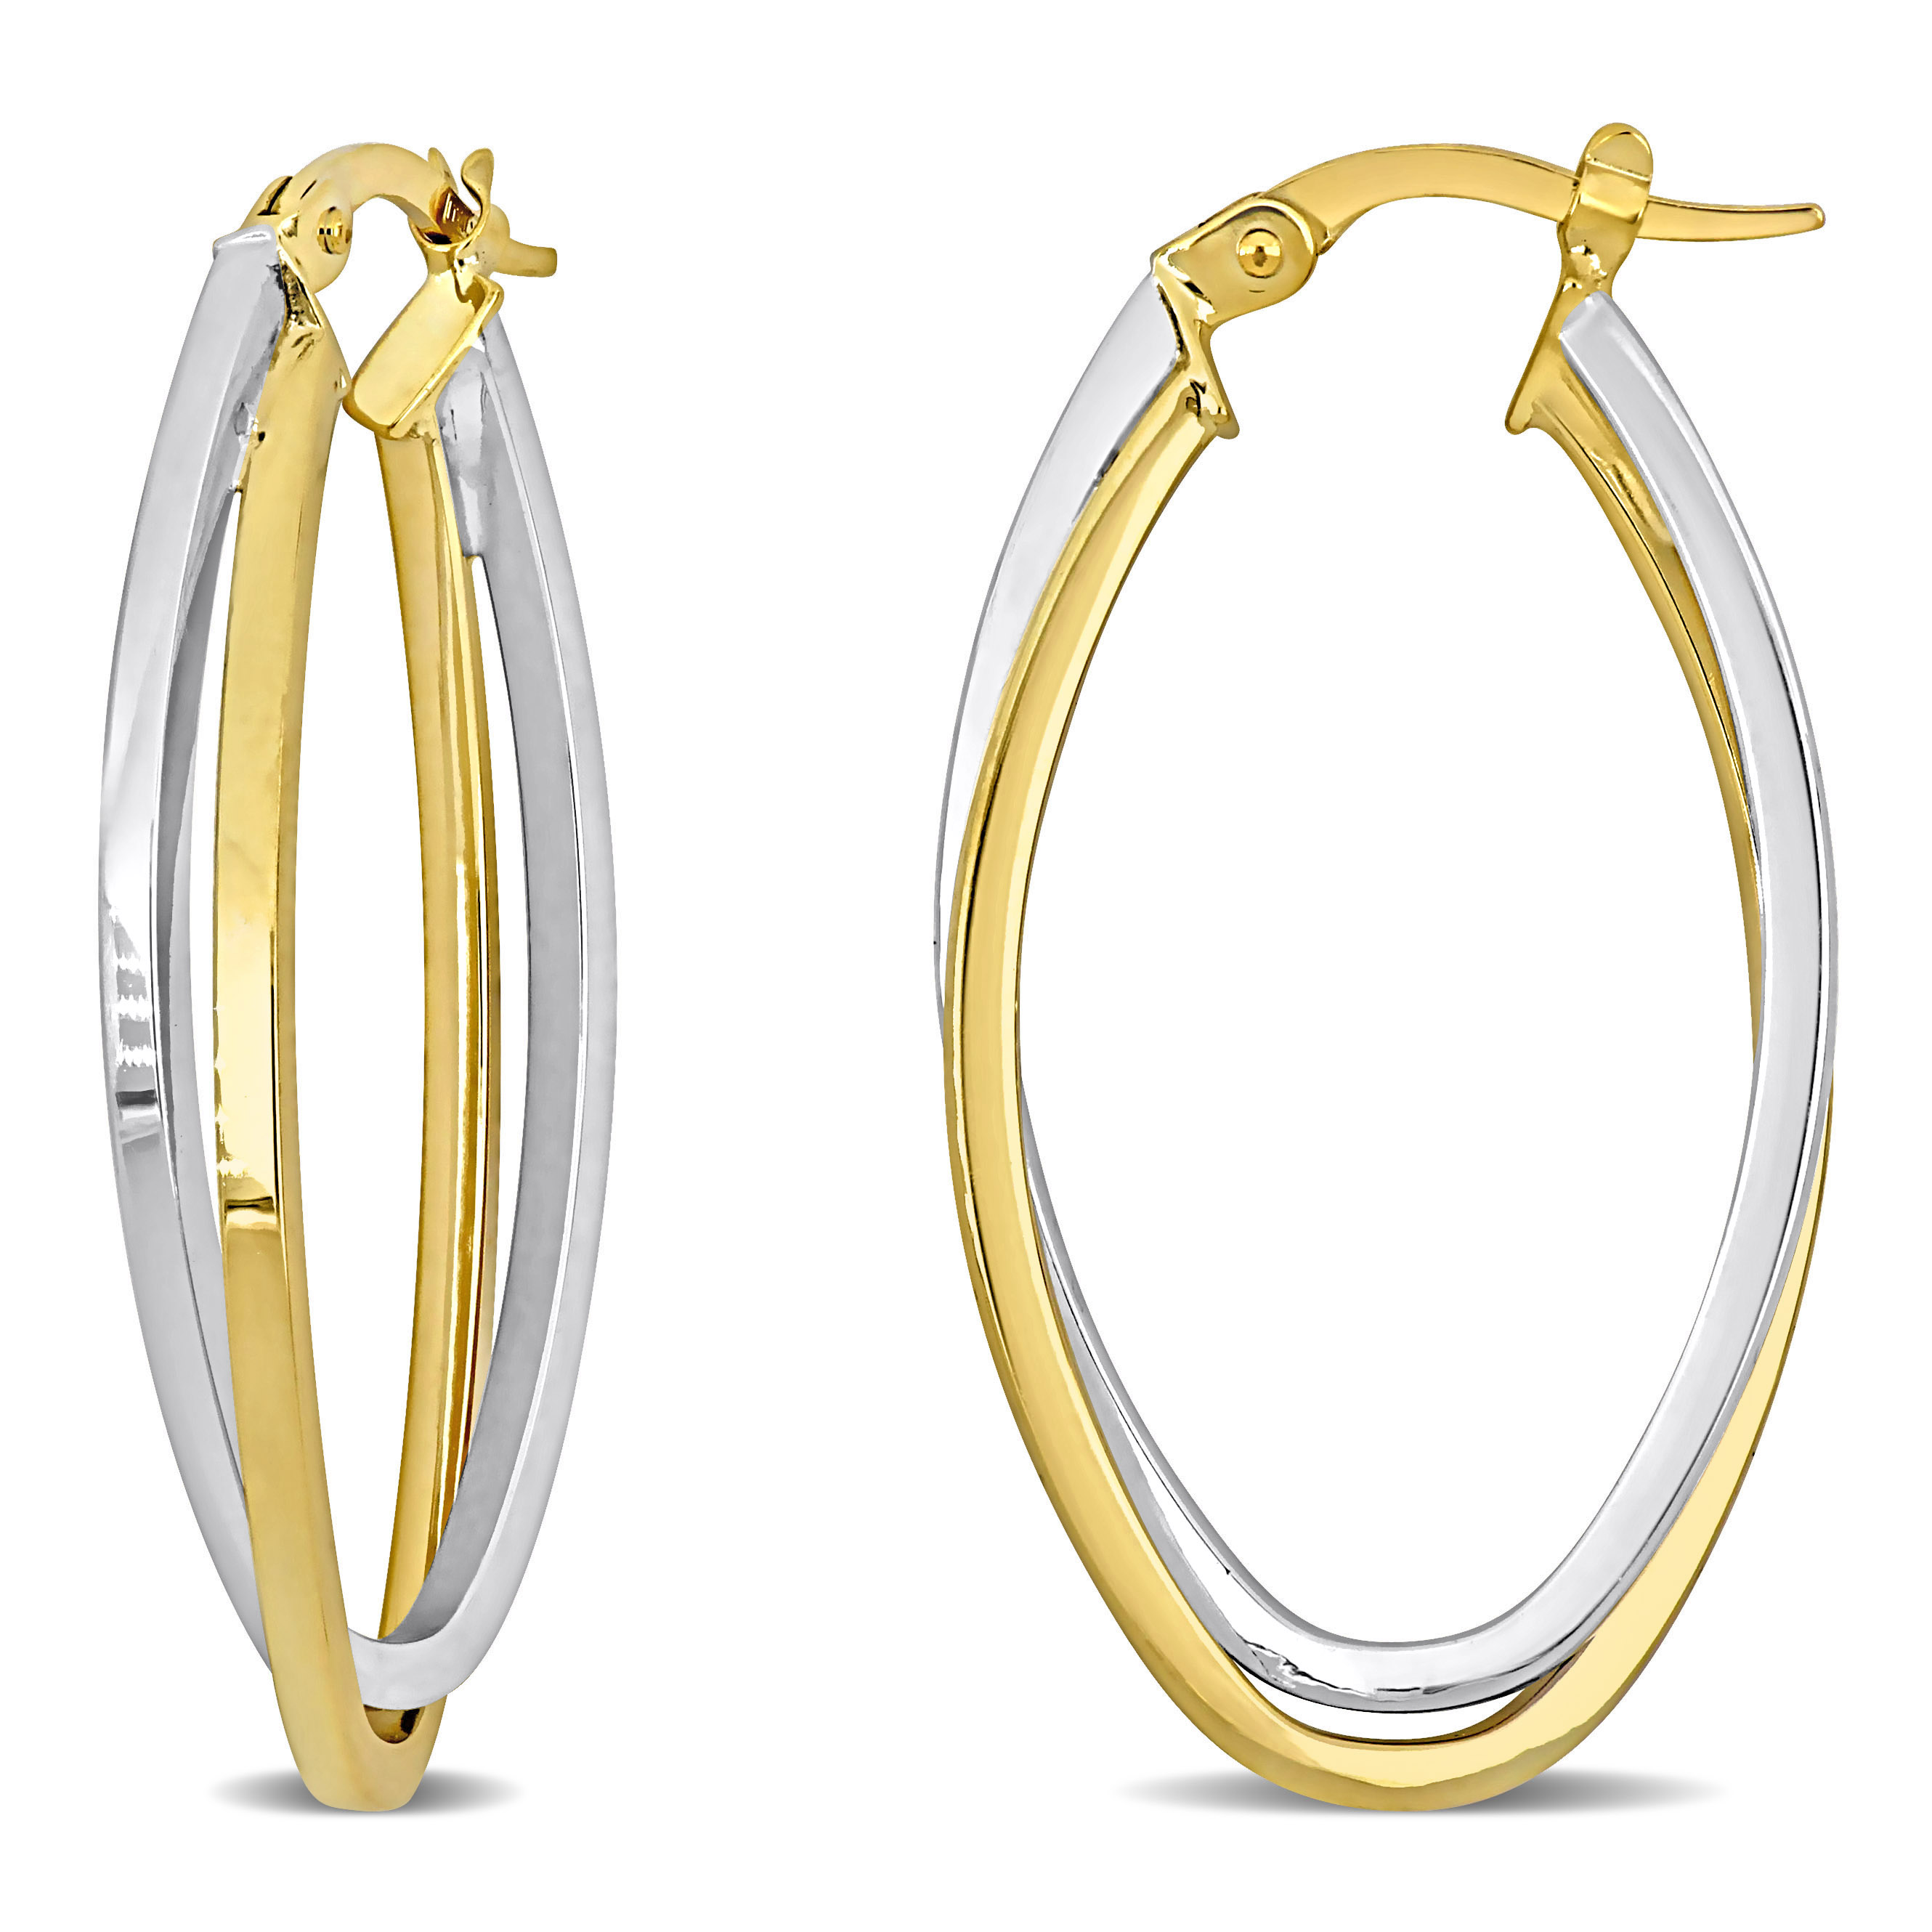 34 MM Crossover Oval Hoop Earrings in 2-Tone 10k Yellow and White Gold